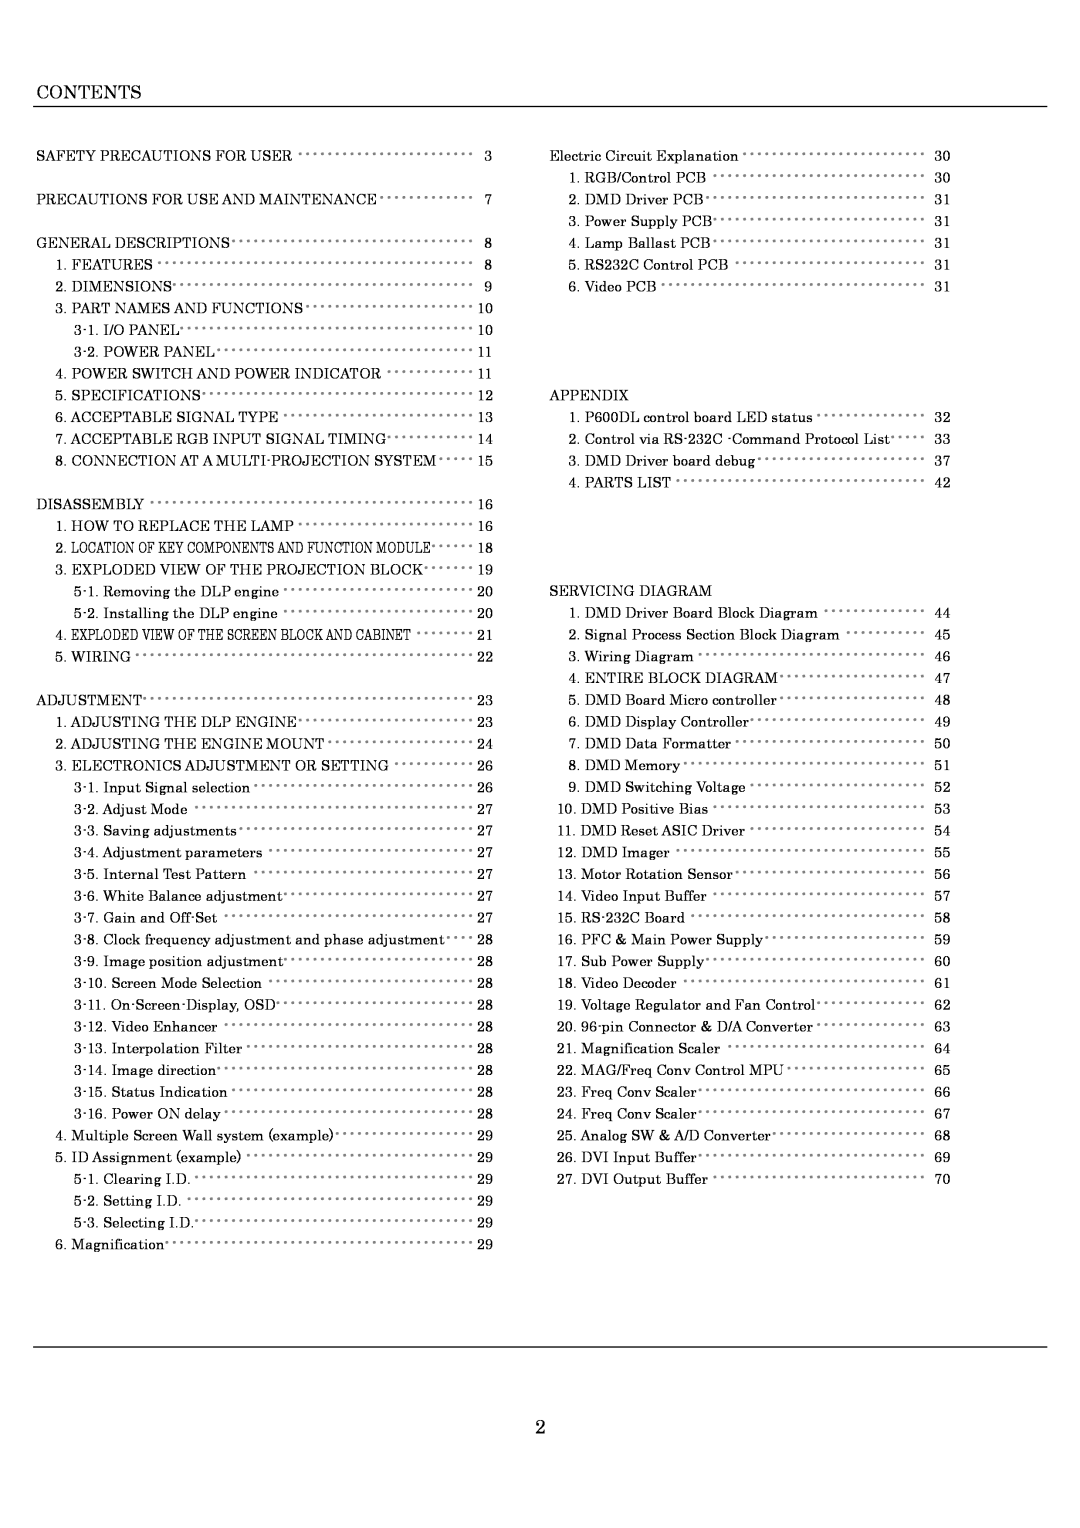 Toshiba P600DL service manual Contents 